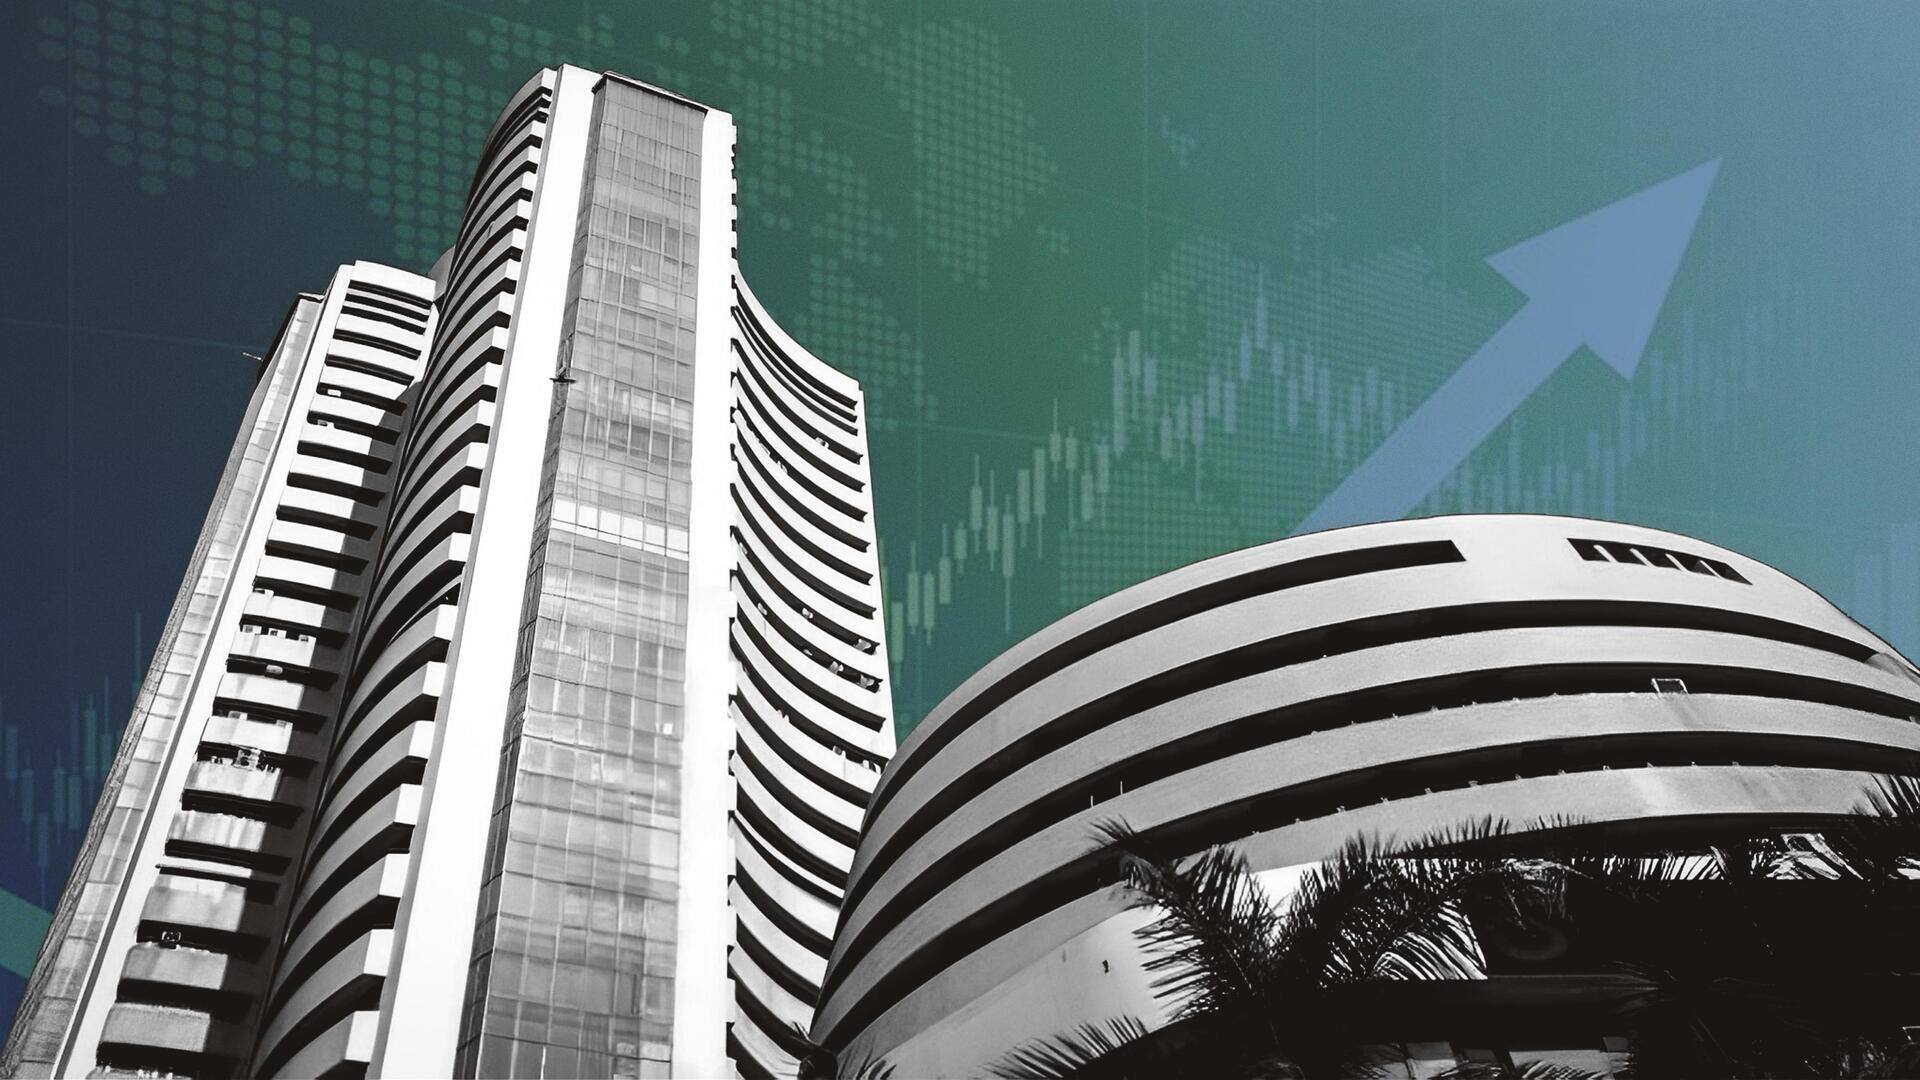 Nifty MidCap 100 surpasses 40,000 mark for the first time